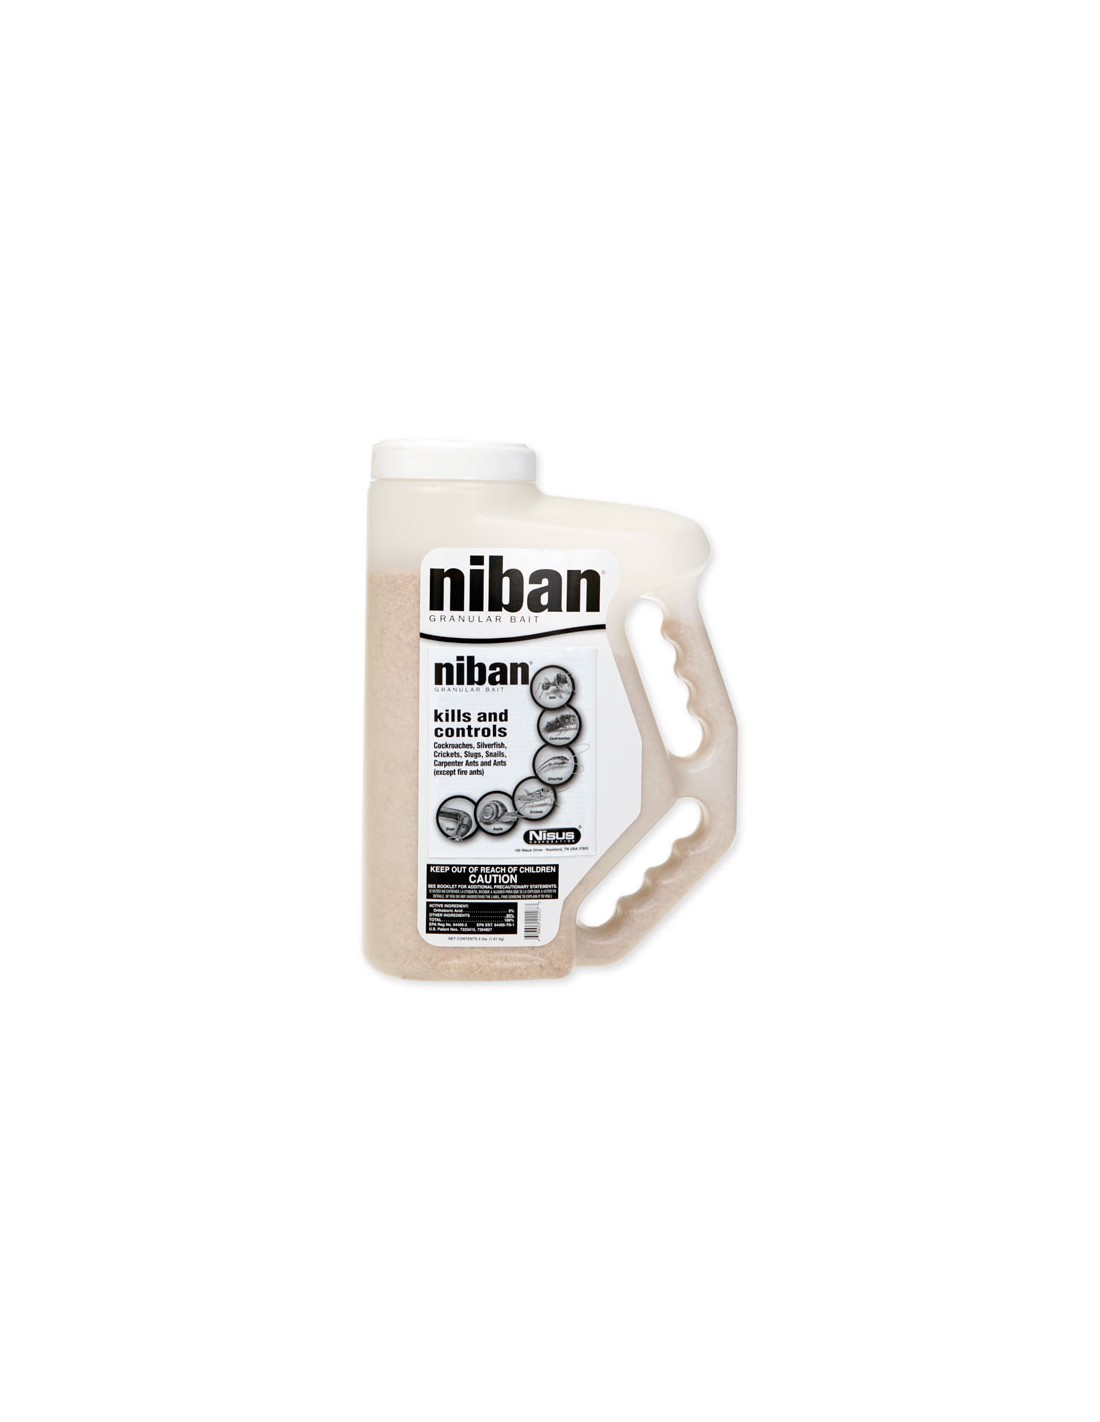 Is Niban safe for household pets?